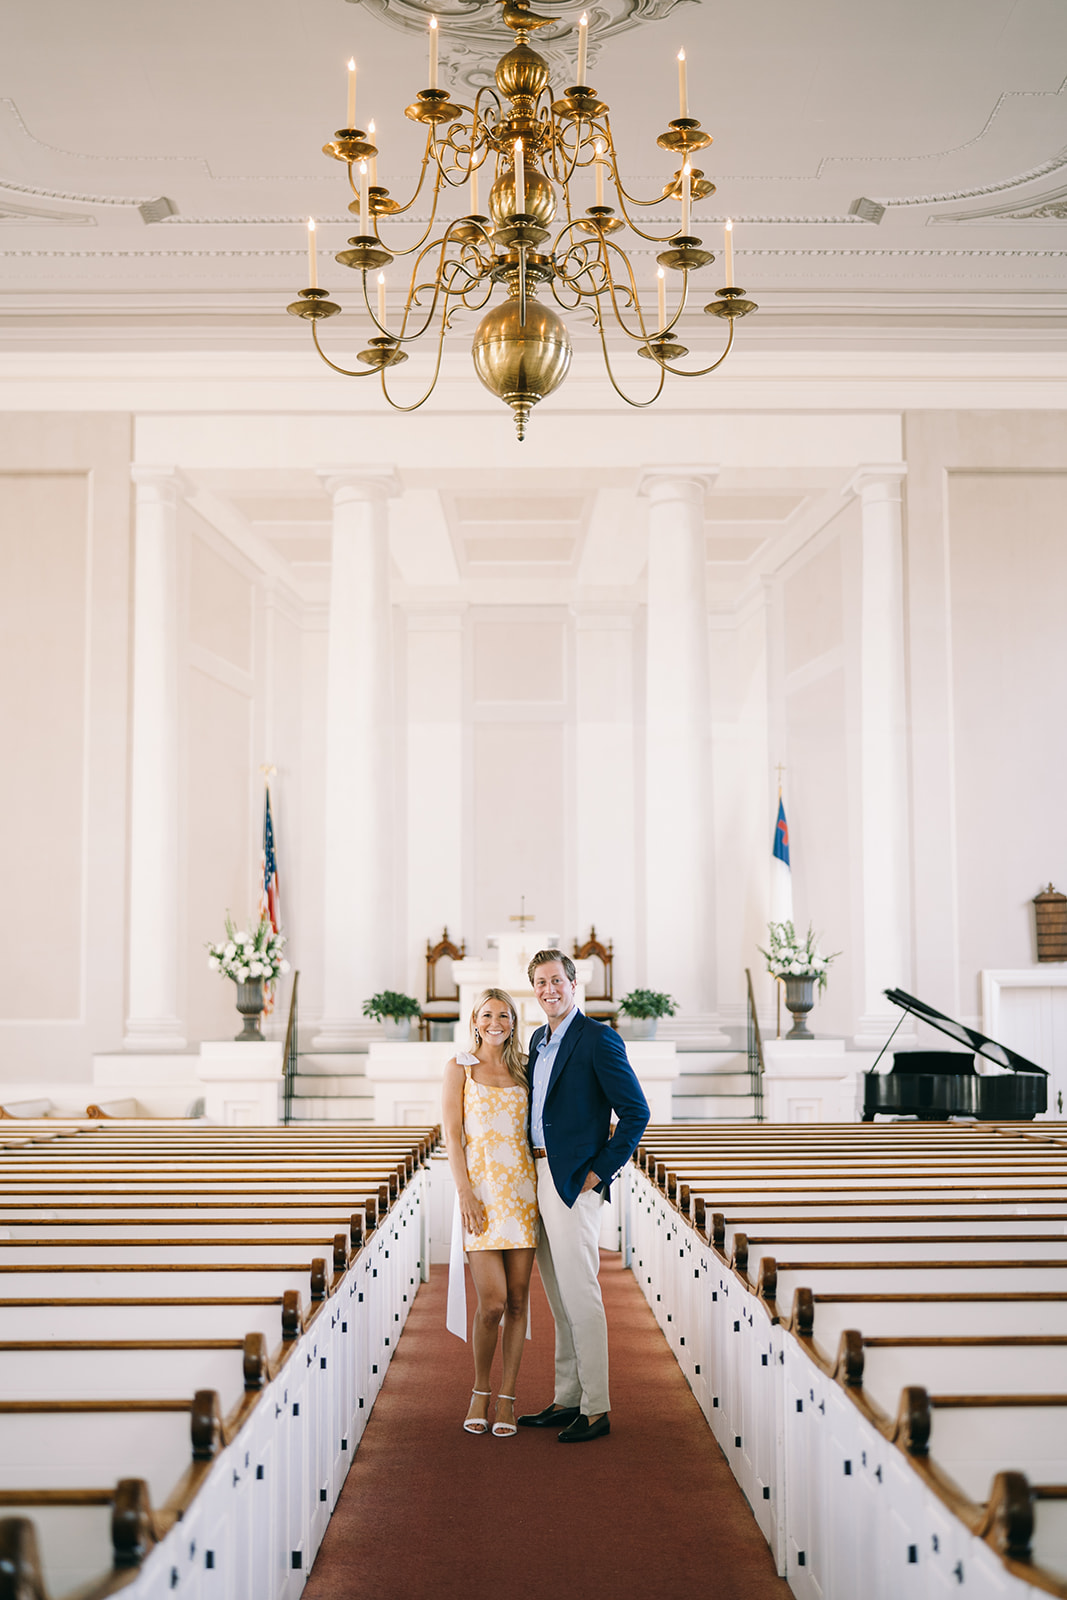 Couple standing together smiling in a church with high ceiling and white walls and a golden chandelier at a church in Nantucket